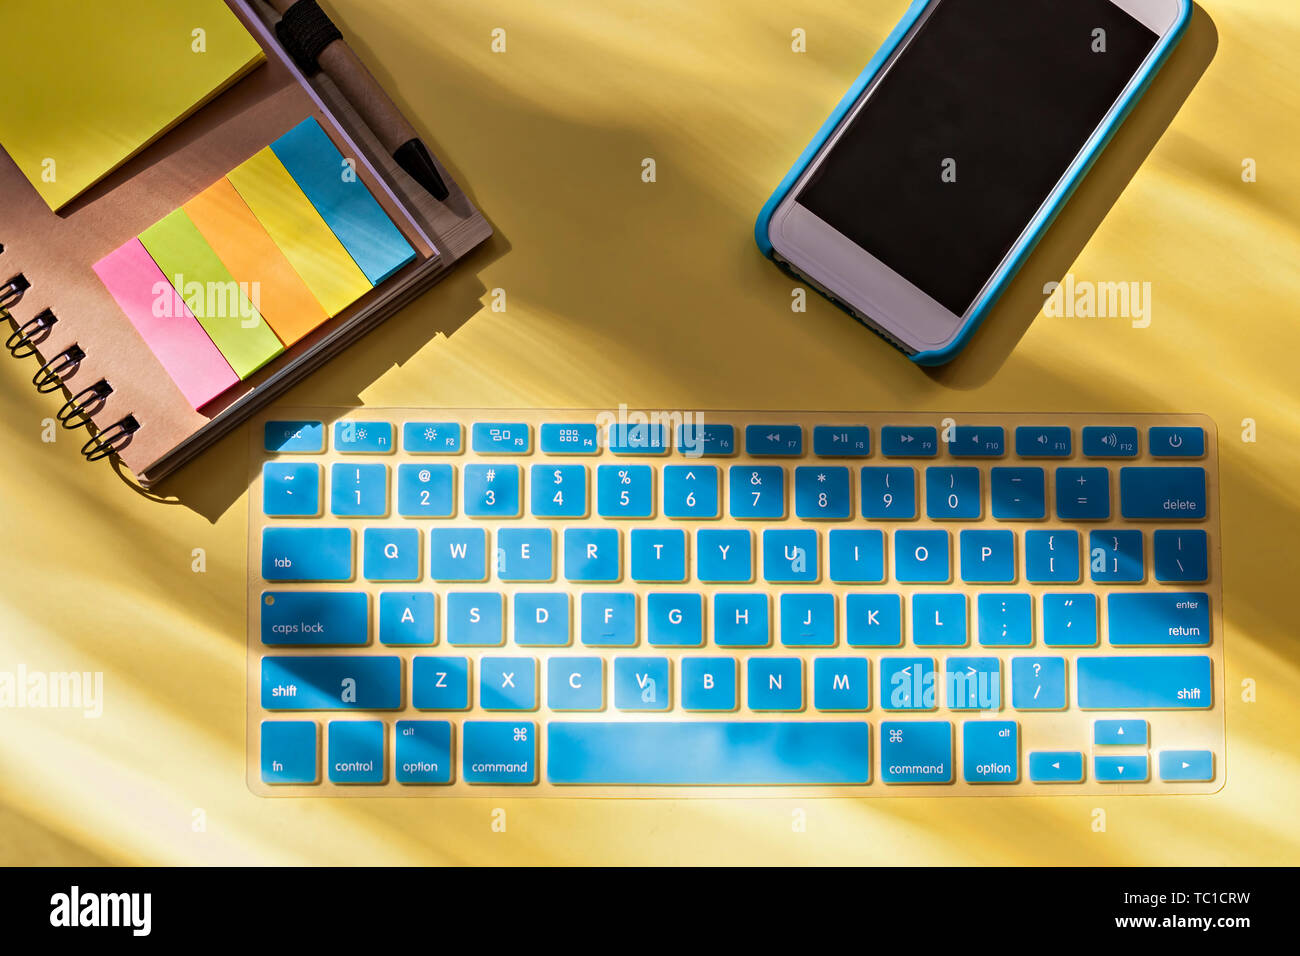 Top view of Workspace with keyboard, smartphone and Spiral Notebook with Pen in Holder with colorful sticky page markers on yellow background Stock Photo